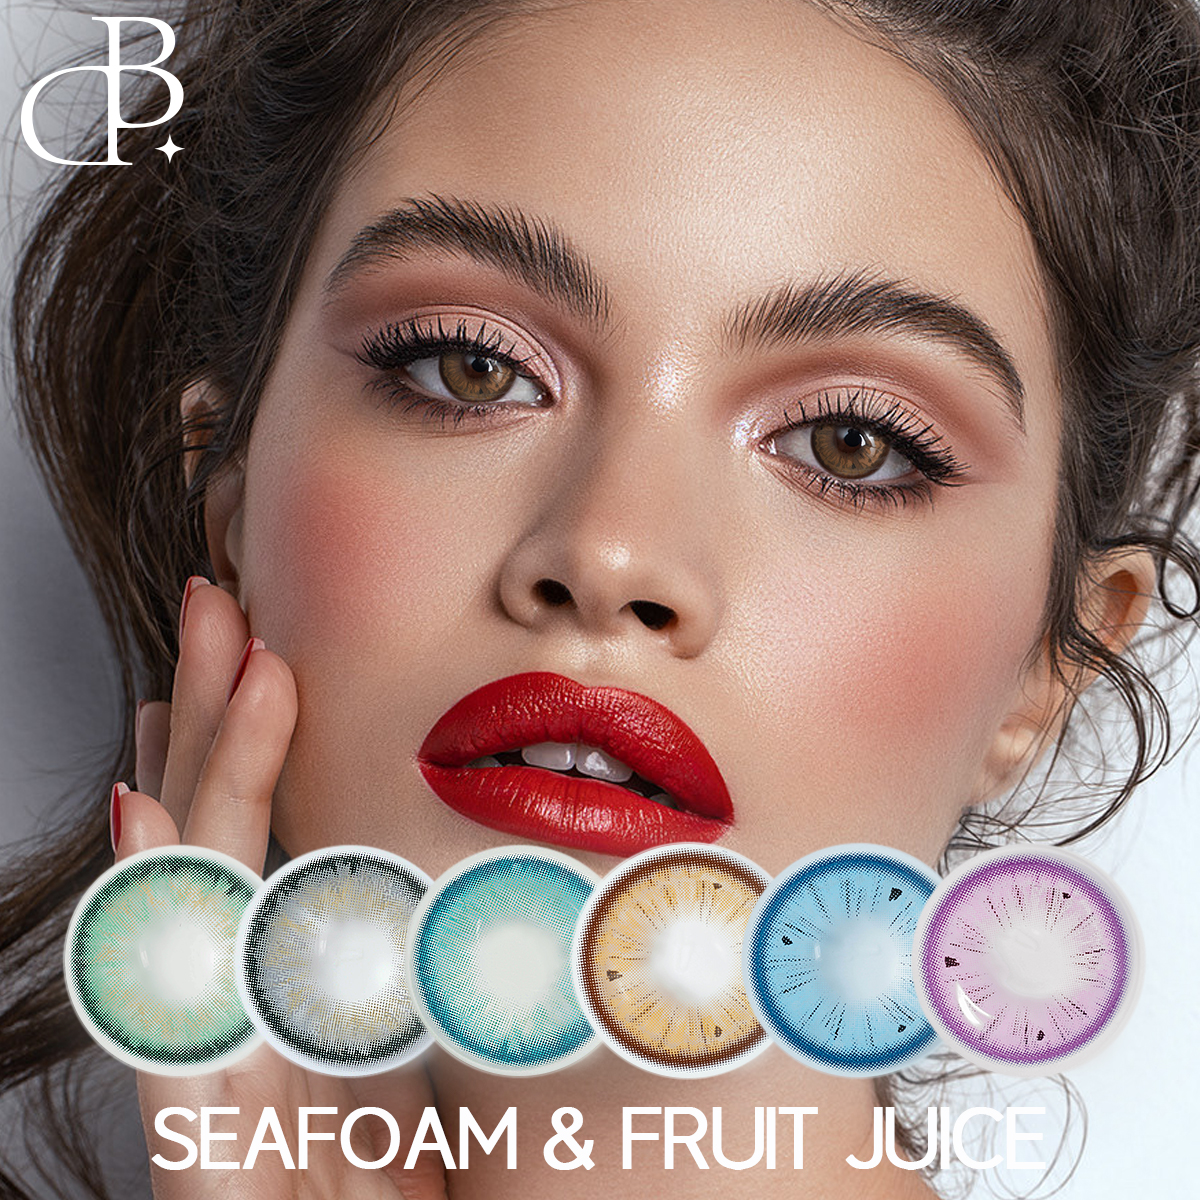 https://www.dlenses.com/seafoamfruit-juice-oemodm-contacto-new-style-natural-eyes-color-lens-cosmetic-eyes-lens-color-contacts-lenses-product/